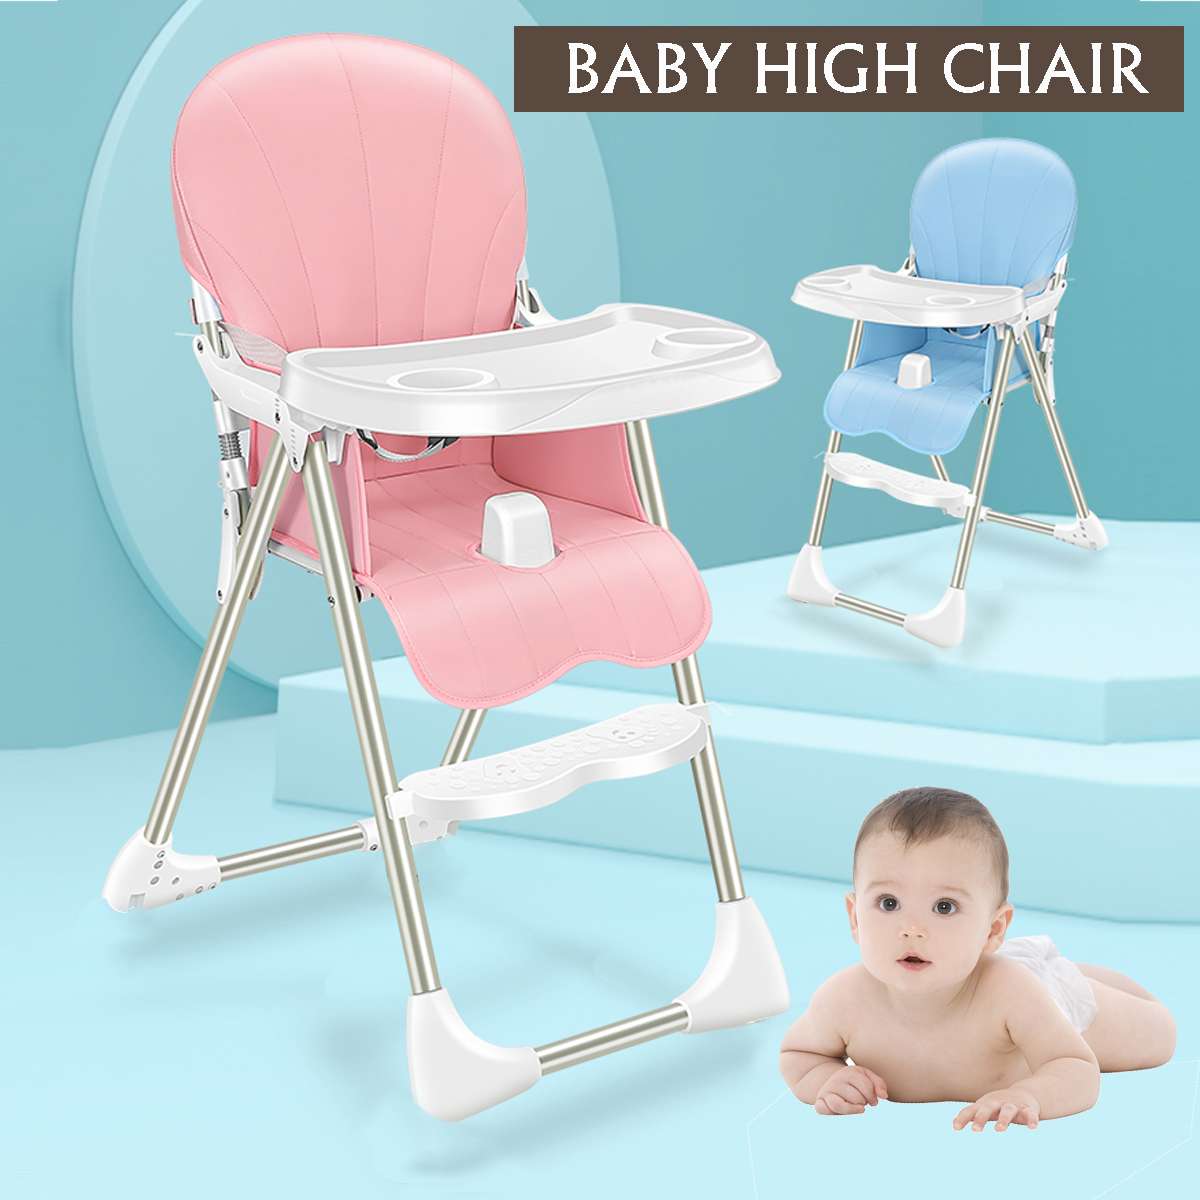 Ditong-Portable-Folding-Baby-High-Chair-Adjustable-Plate-Lockable-Wheels-PU-Seat-with-Environmental--1748389-2